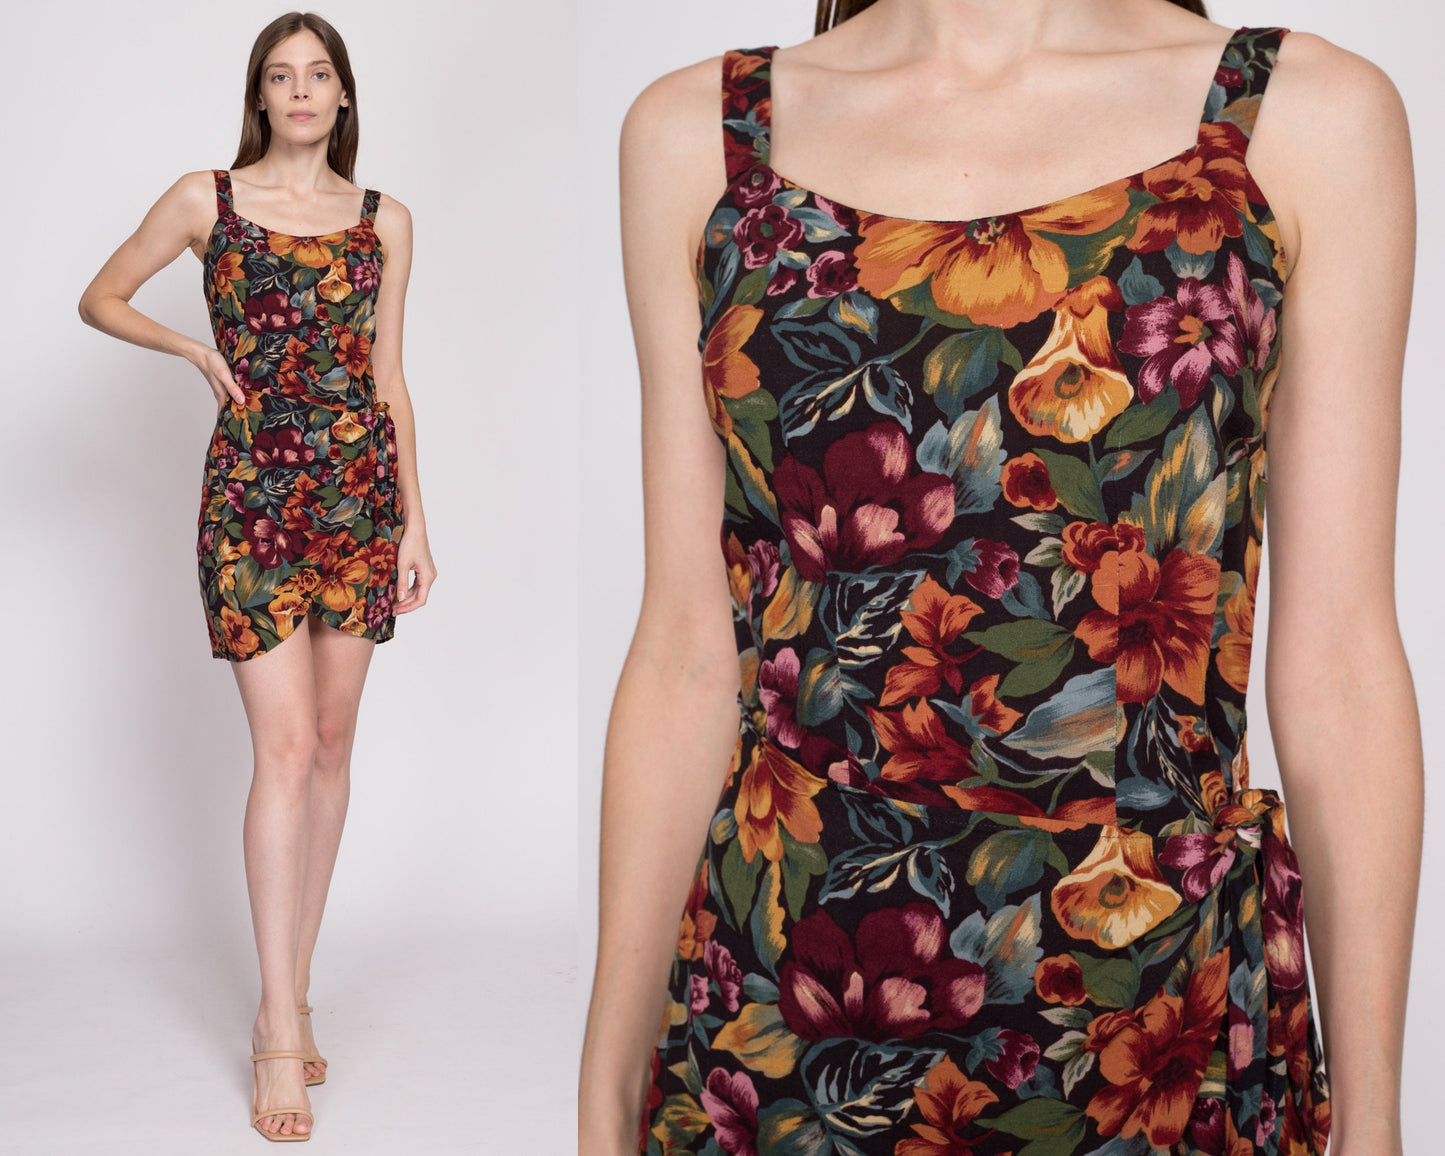 XS-S| 90s Tropical Floral Mini Wrap Dress - XS to Small | Vintage All That Jazz Boho Fitted Front Tie Sundress